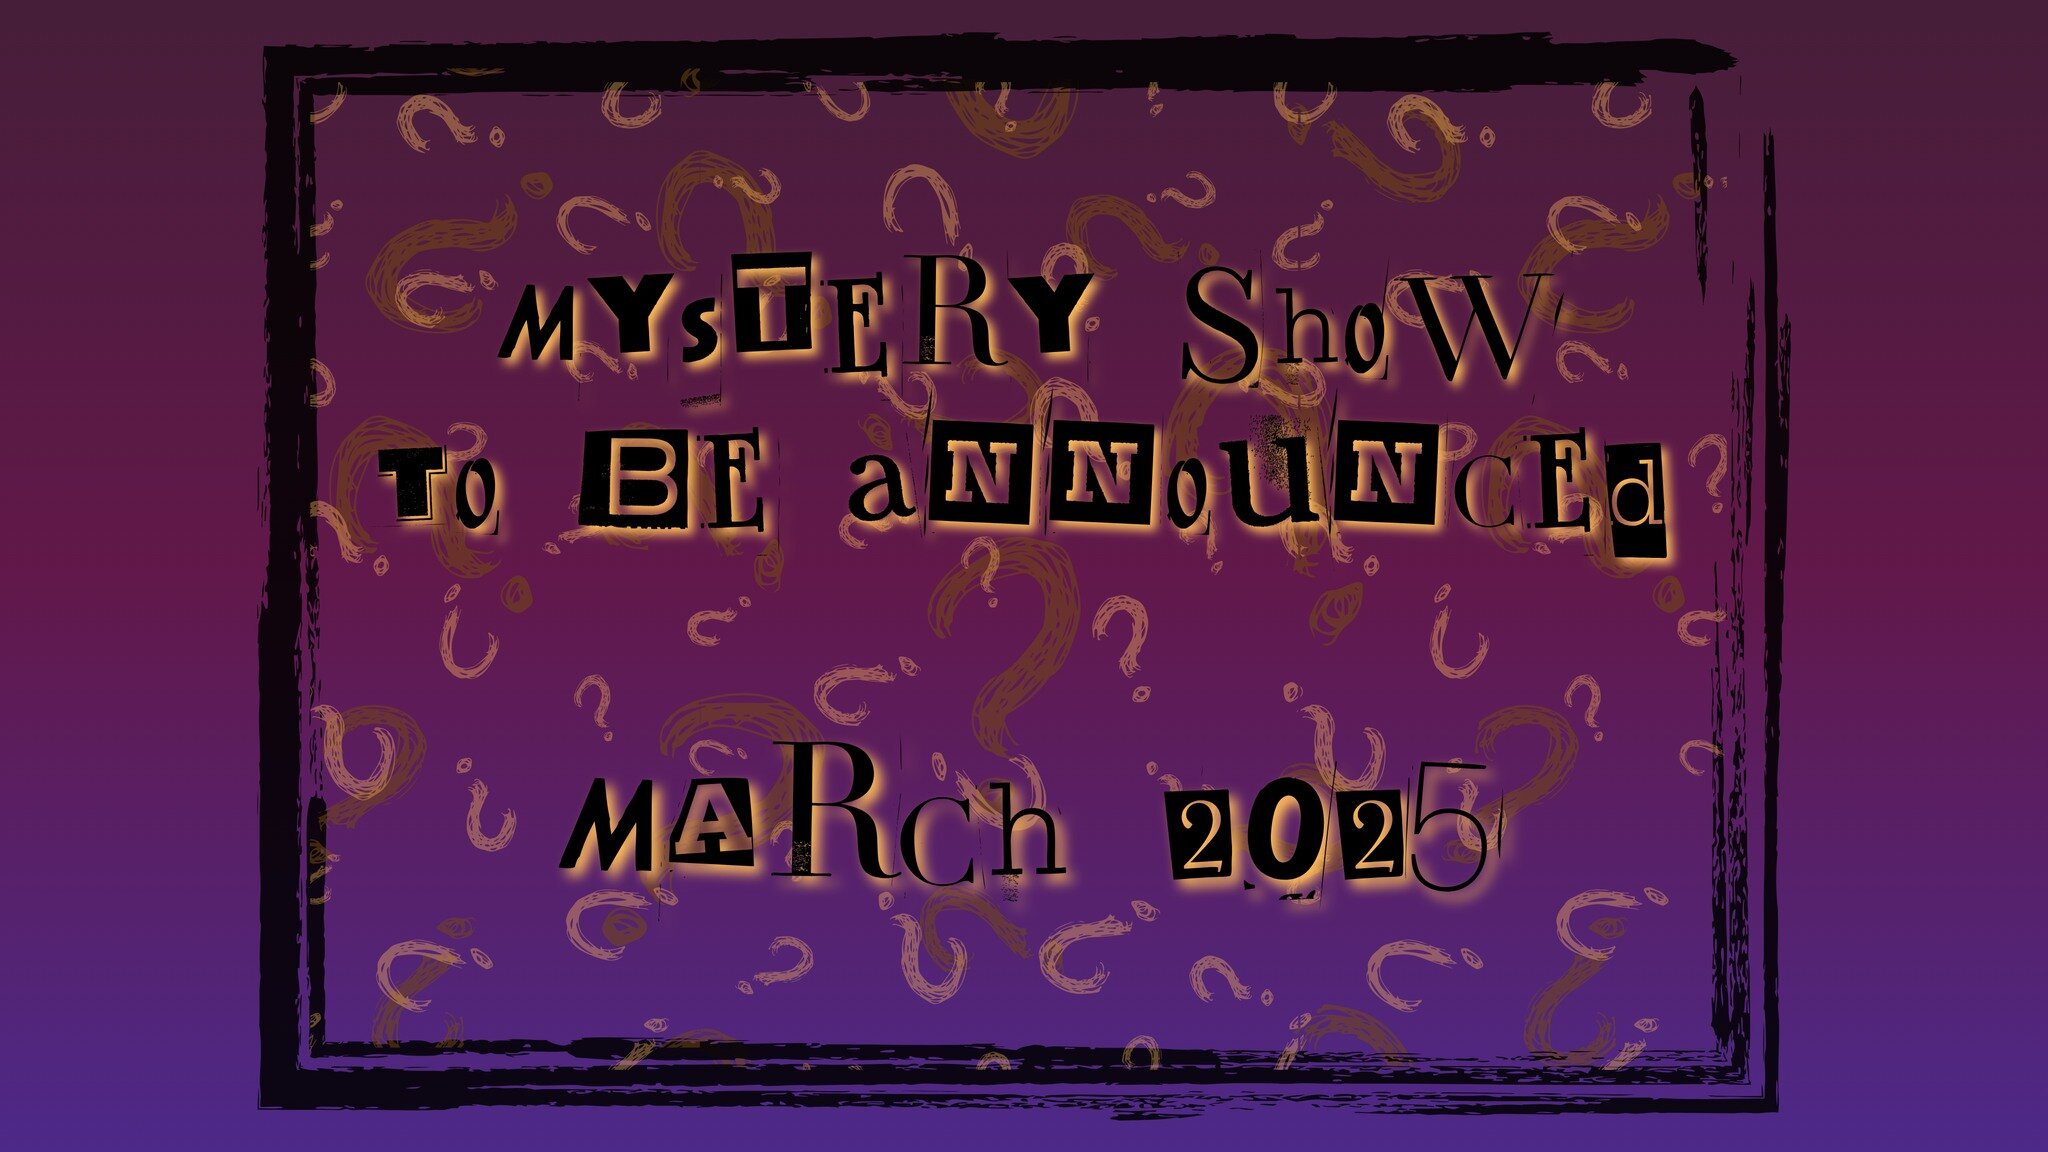 Show Reveal #4!

TO BE ANNOUNCED
Directed by ???

We can't give away ALL of our secrets! &quot;To Be Announced&quot; by ??? will be revealed later in the year! Join us in the black box March 2025 for another exploration under the Masque.